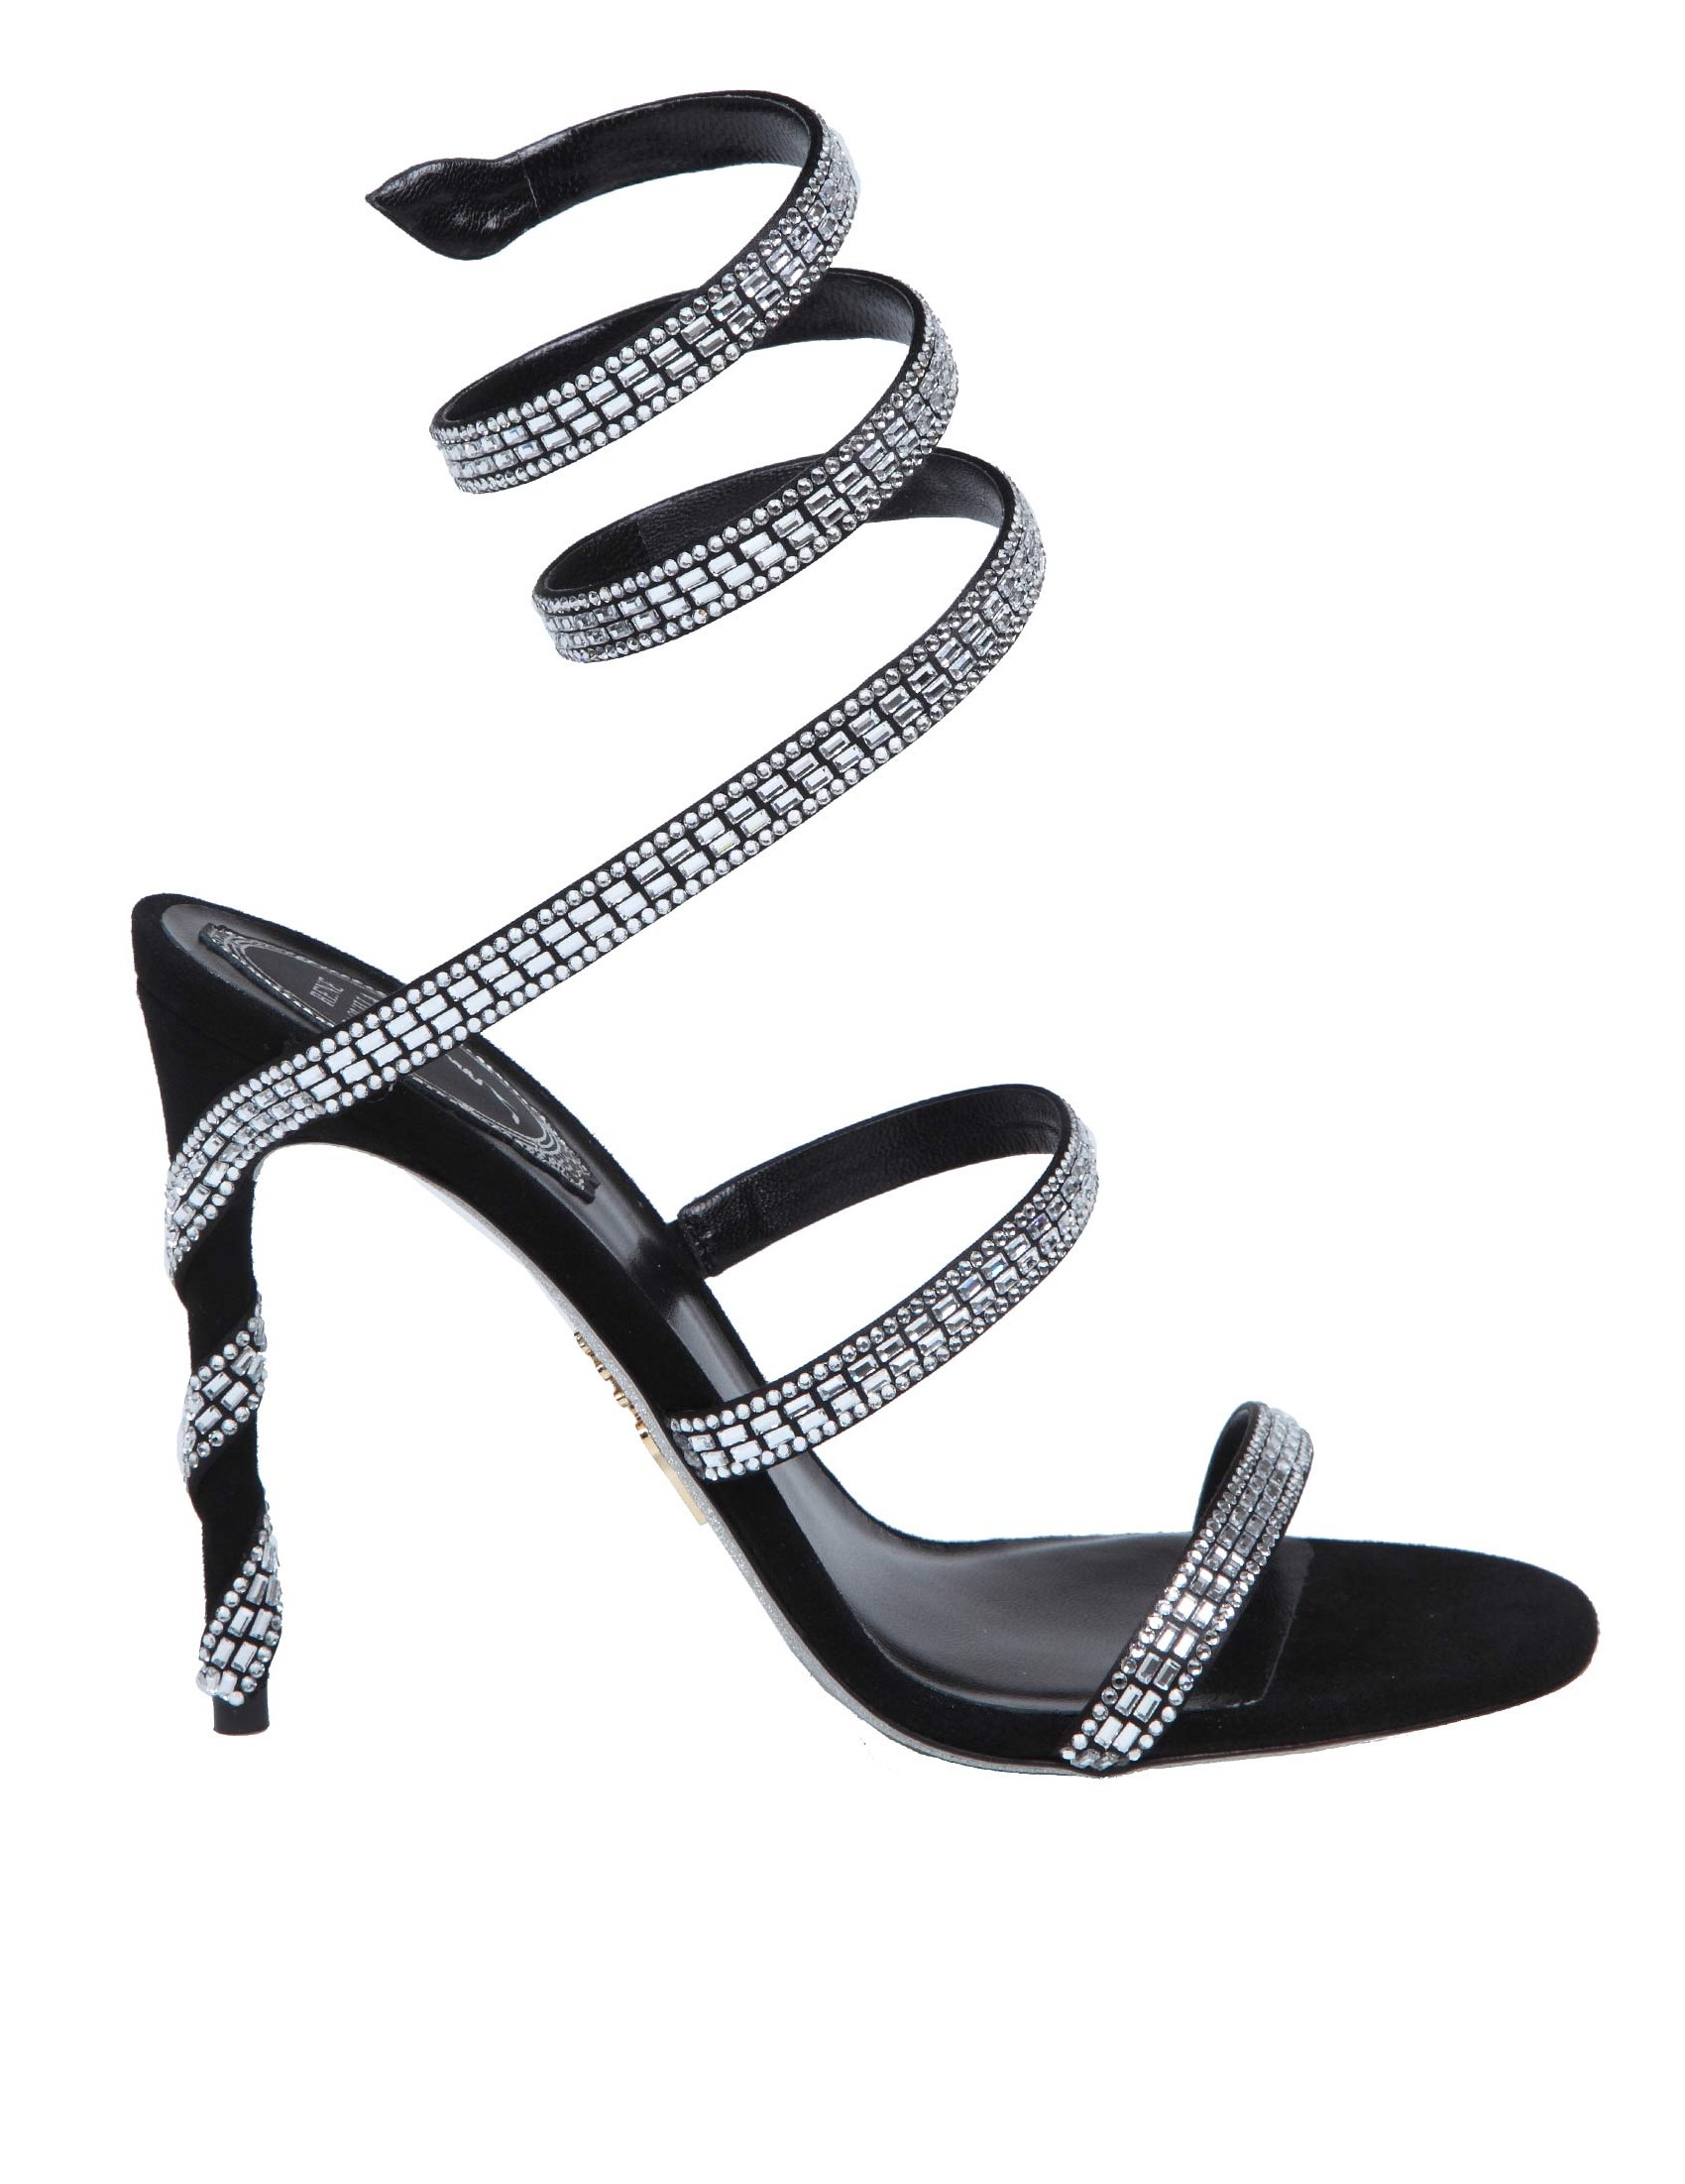 RENE CAOVILLA CLEO SANDAL WITH SILVER CRYSTALS